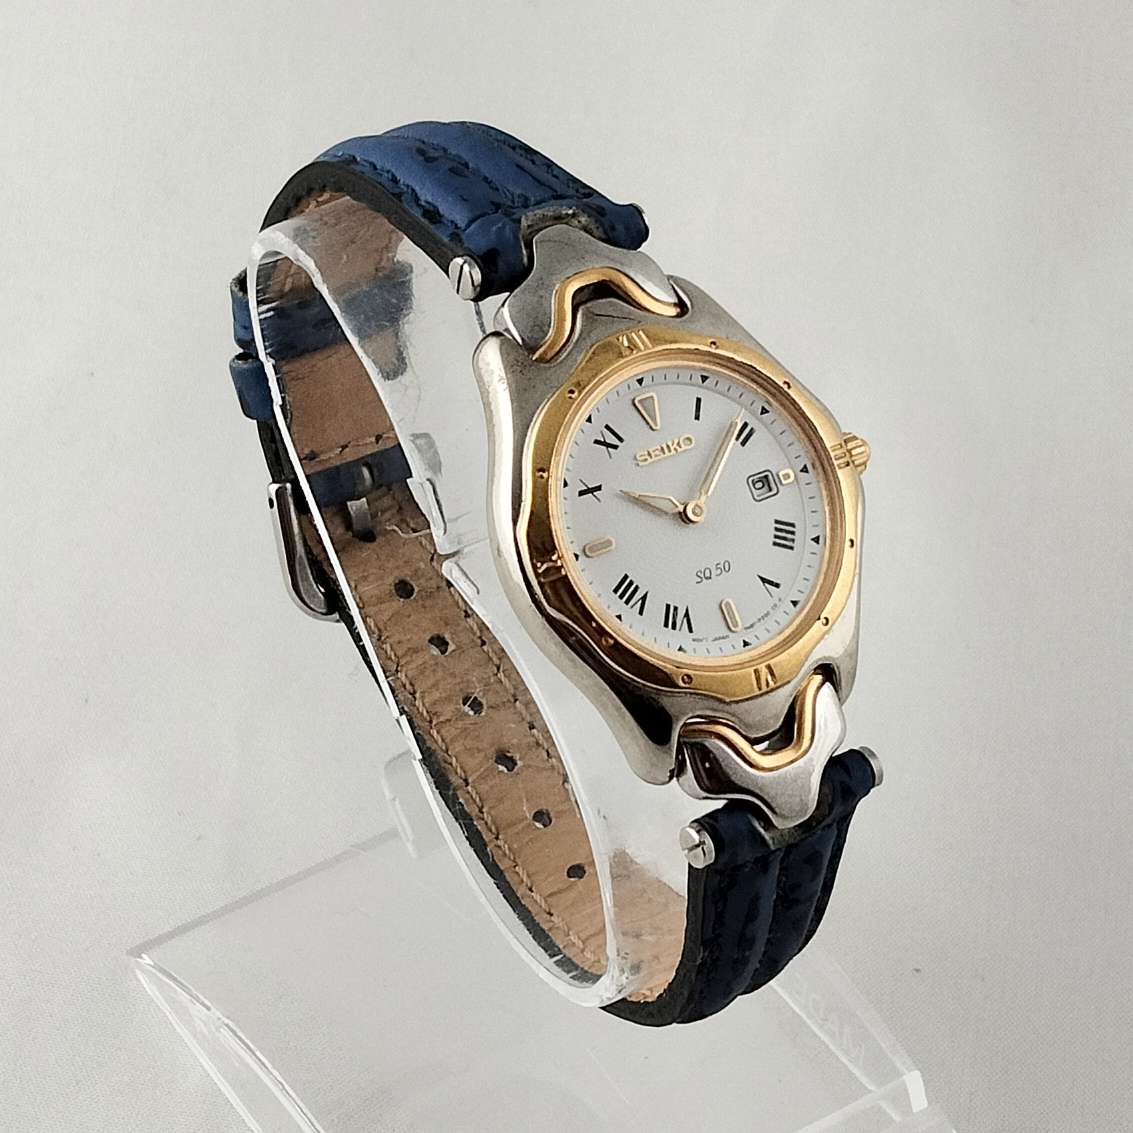 Seiko Unisex Watch, White Dial, Blue and Black Leather Strap